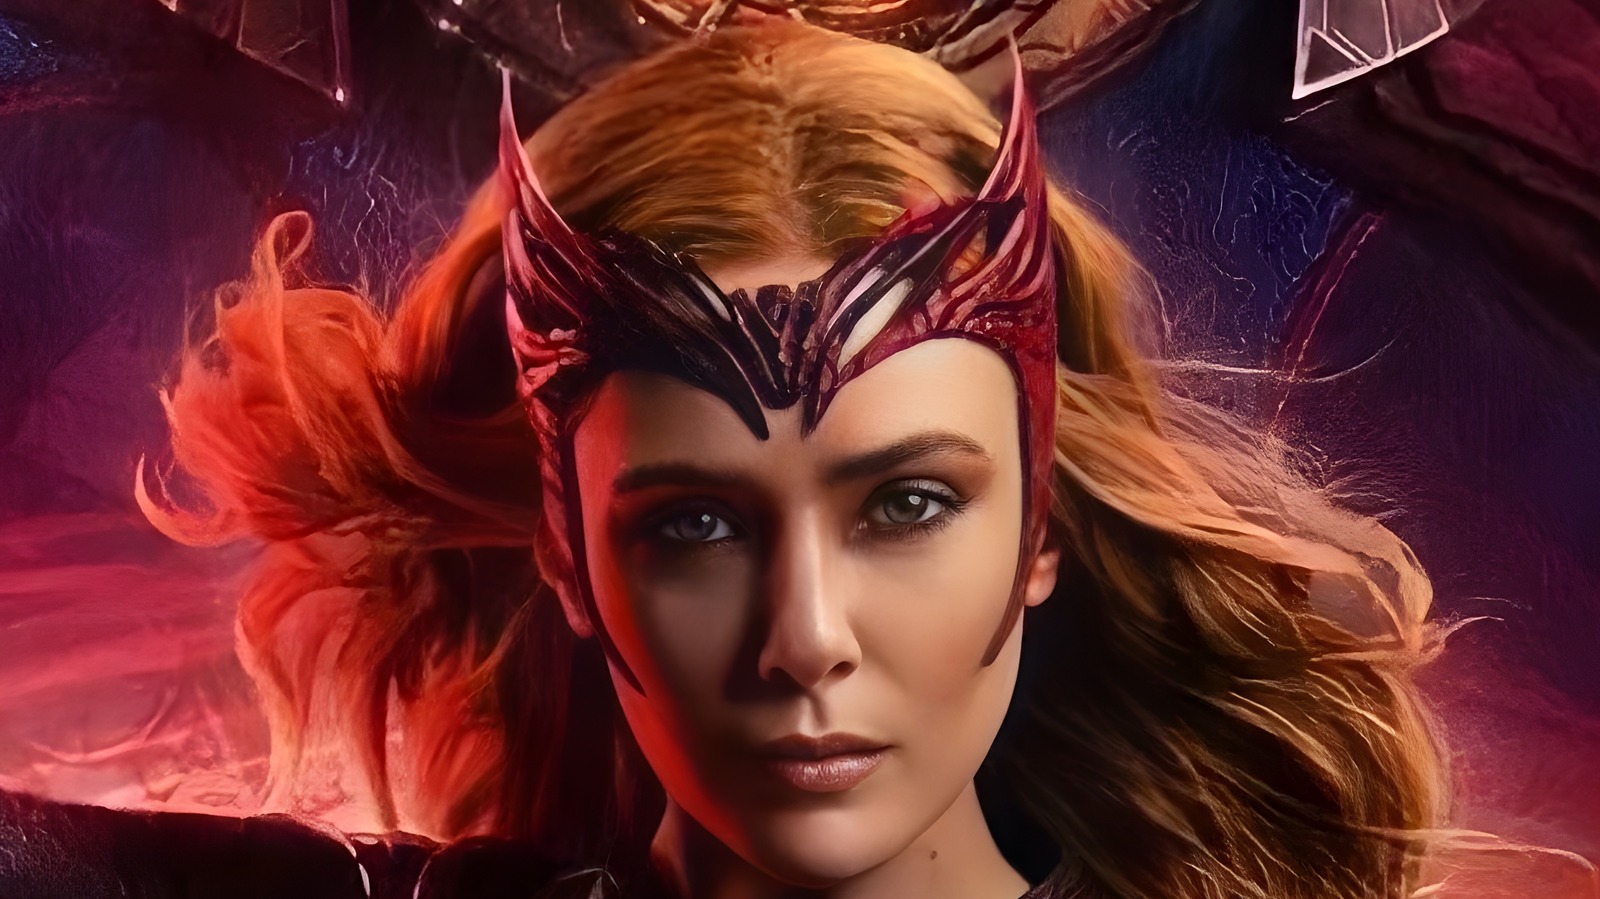 Avengers: Age of Ultron': Scarlet Witch's Tragic Comic Book Career